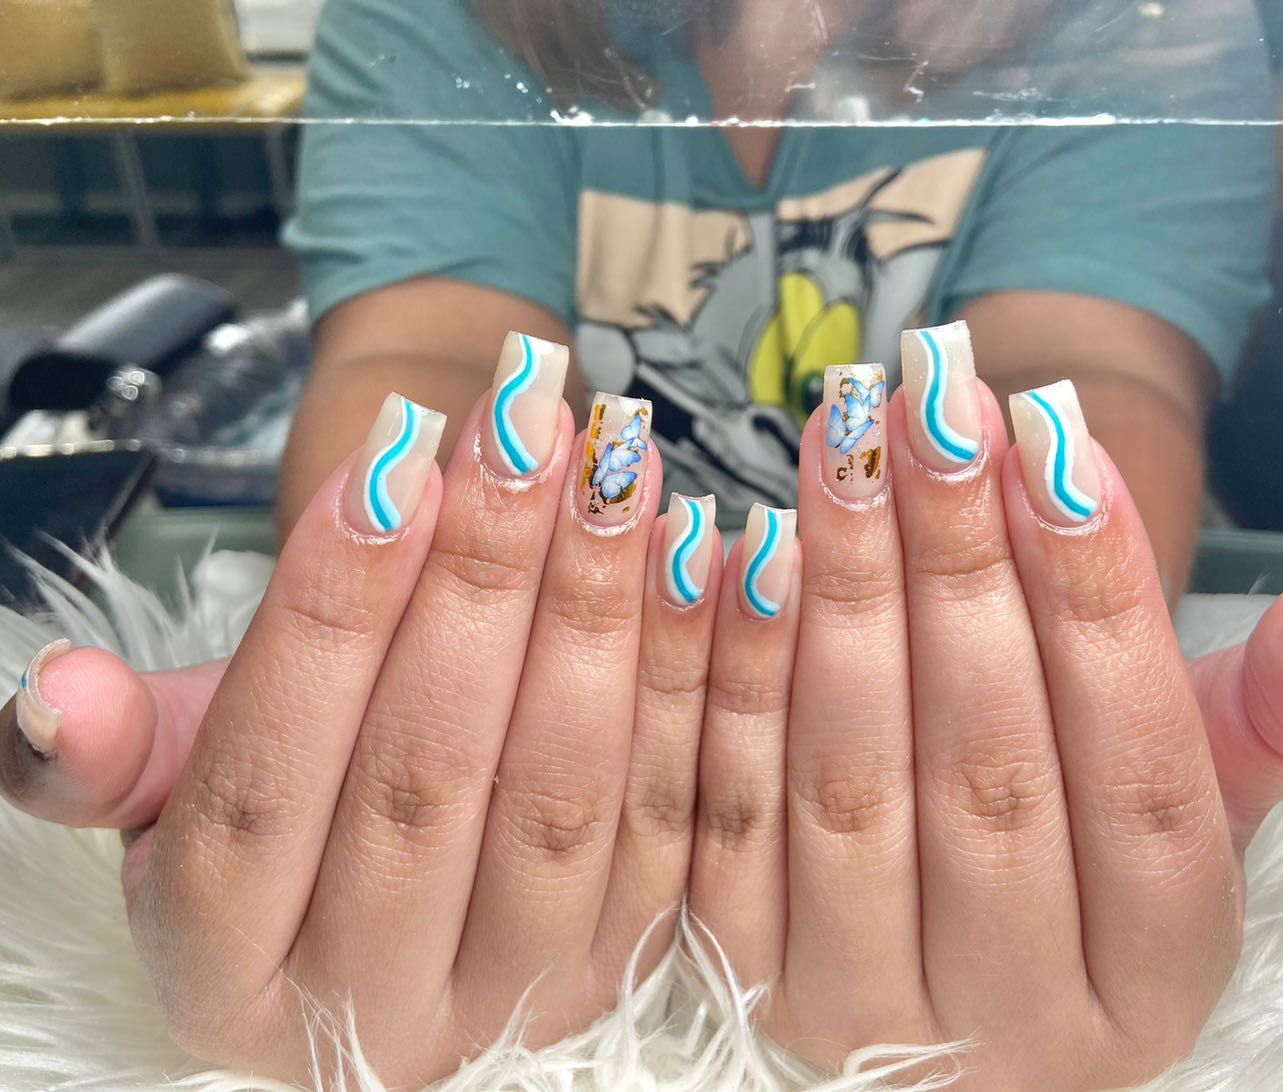 Top 20 Acrylic Nails Places Near You In Elizabeth Nj October 2021